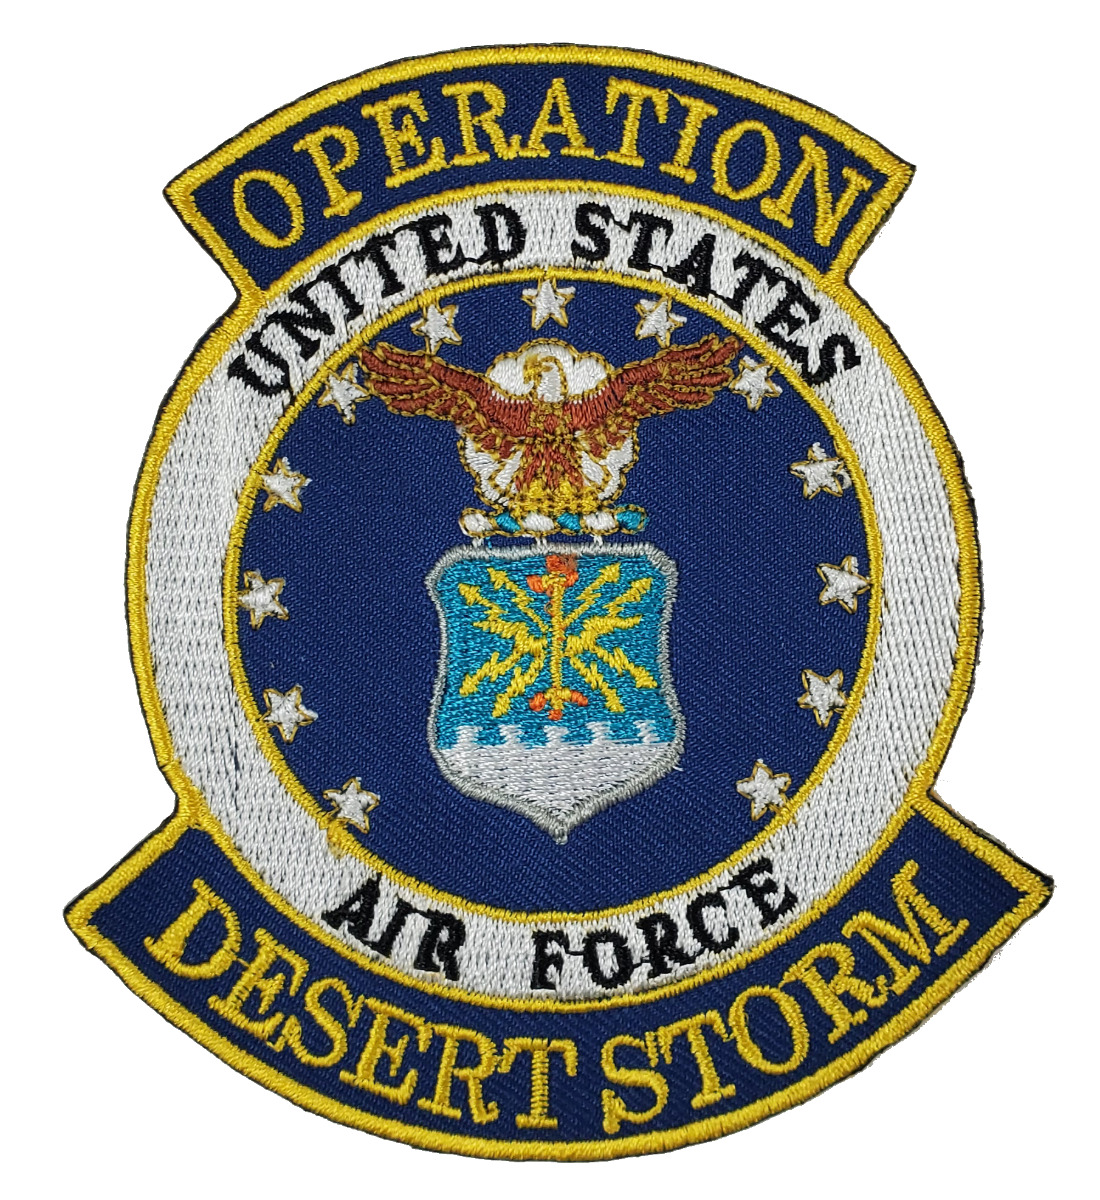 UNITED STATES AIR FORCE OPERATION DESERT STORM PATCH -  Veteran Owned Business.